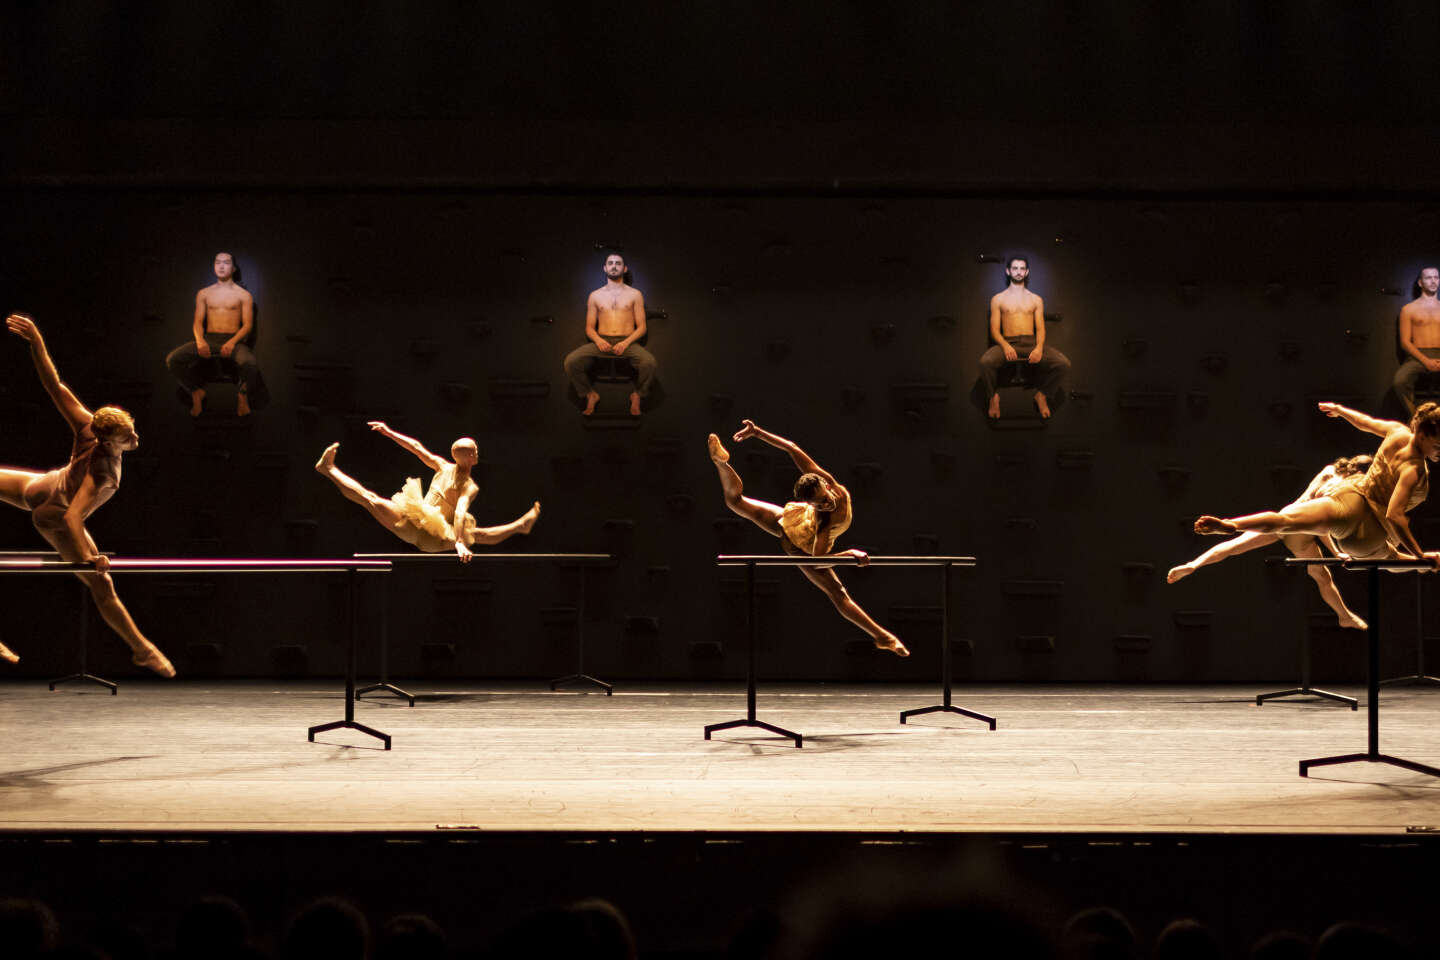 With “Momo”, Ohad Naharin works on the notion of separation in the body